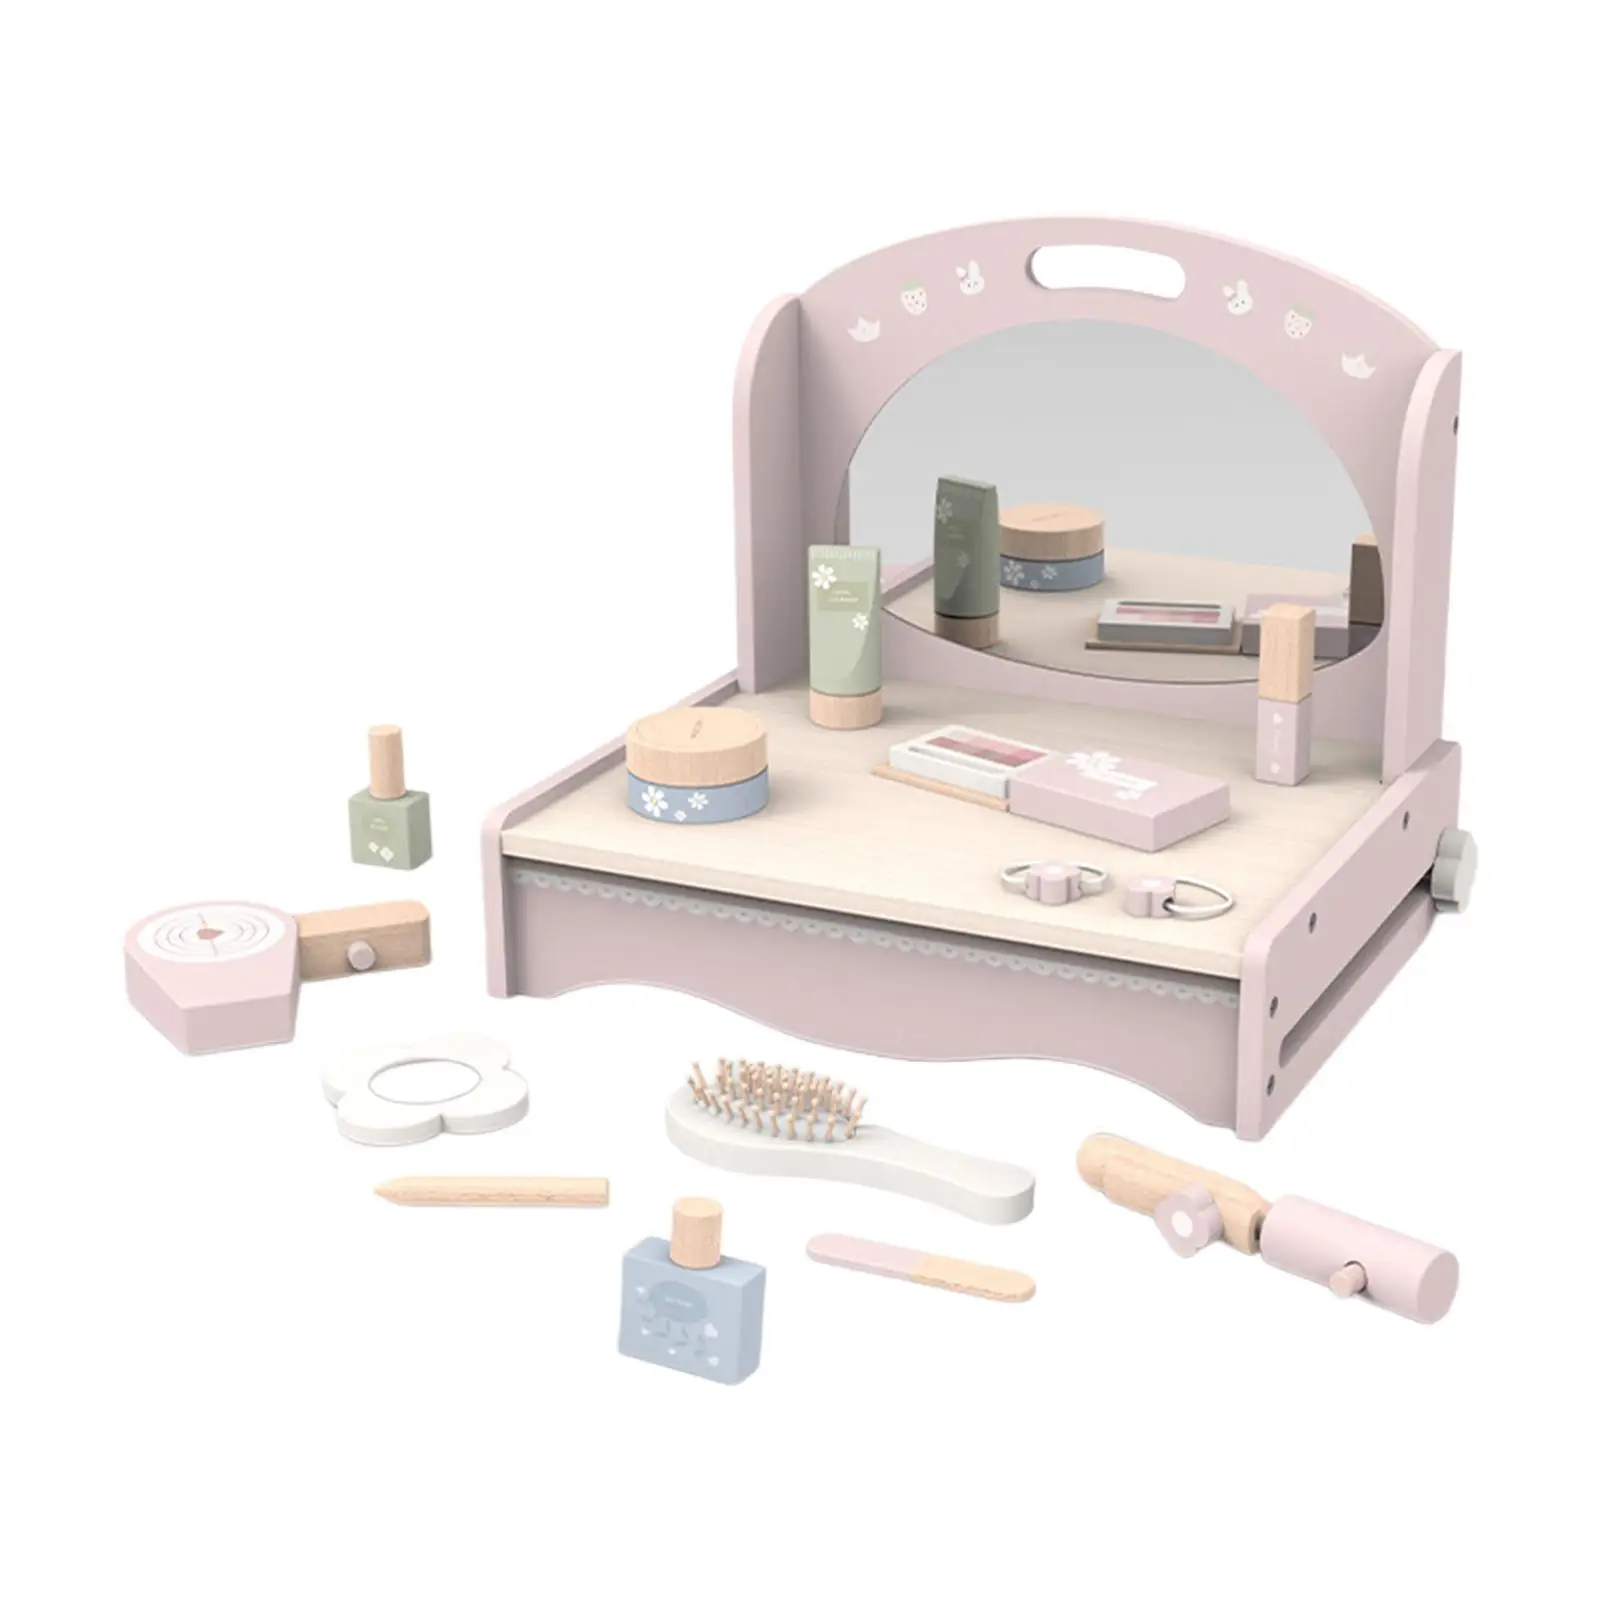 Kids Play Vanity toy vanity Table Cosmetic Set for Game Learning